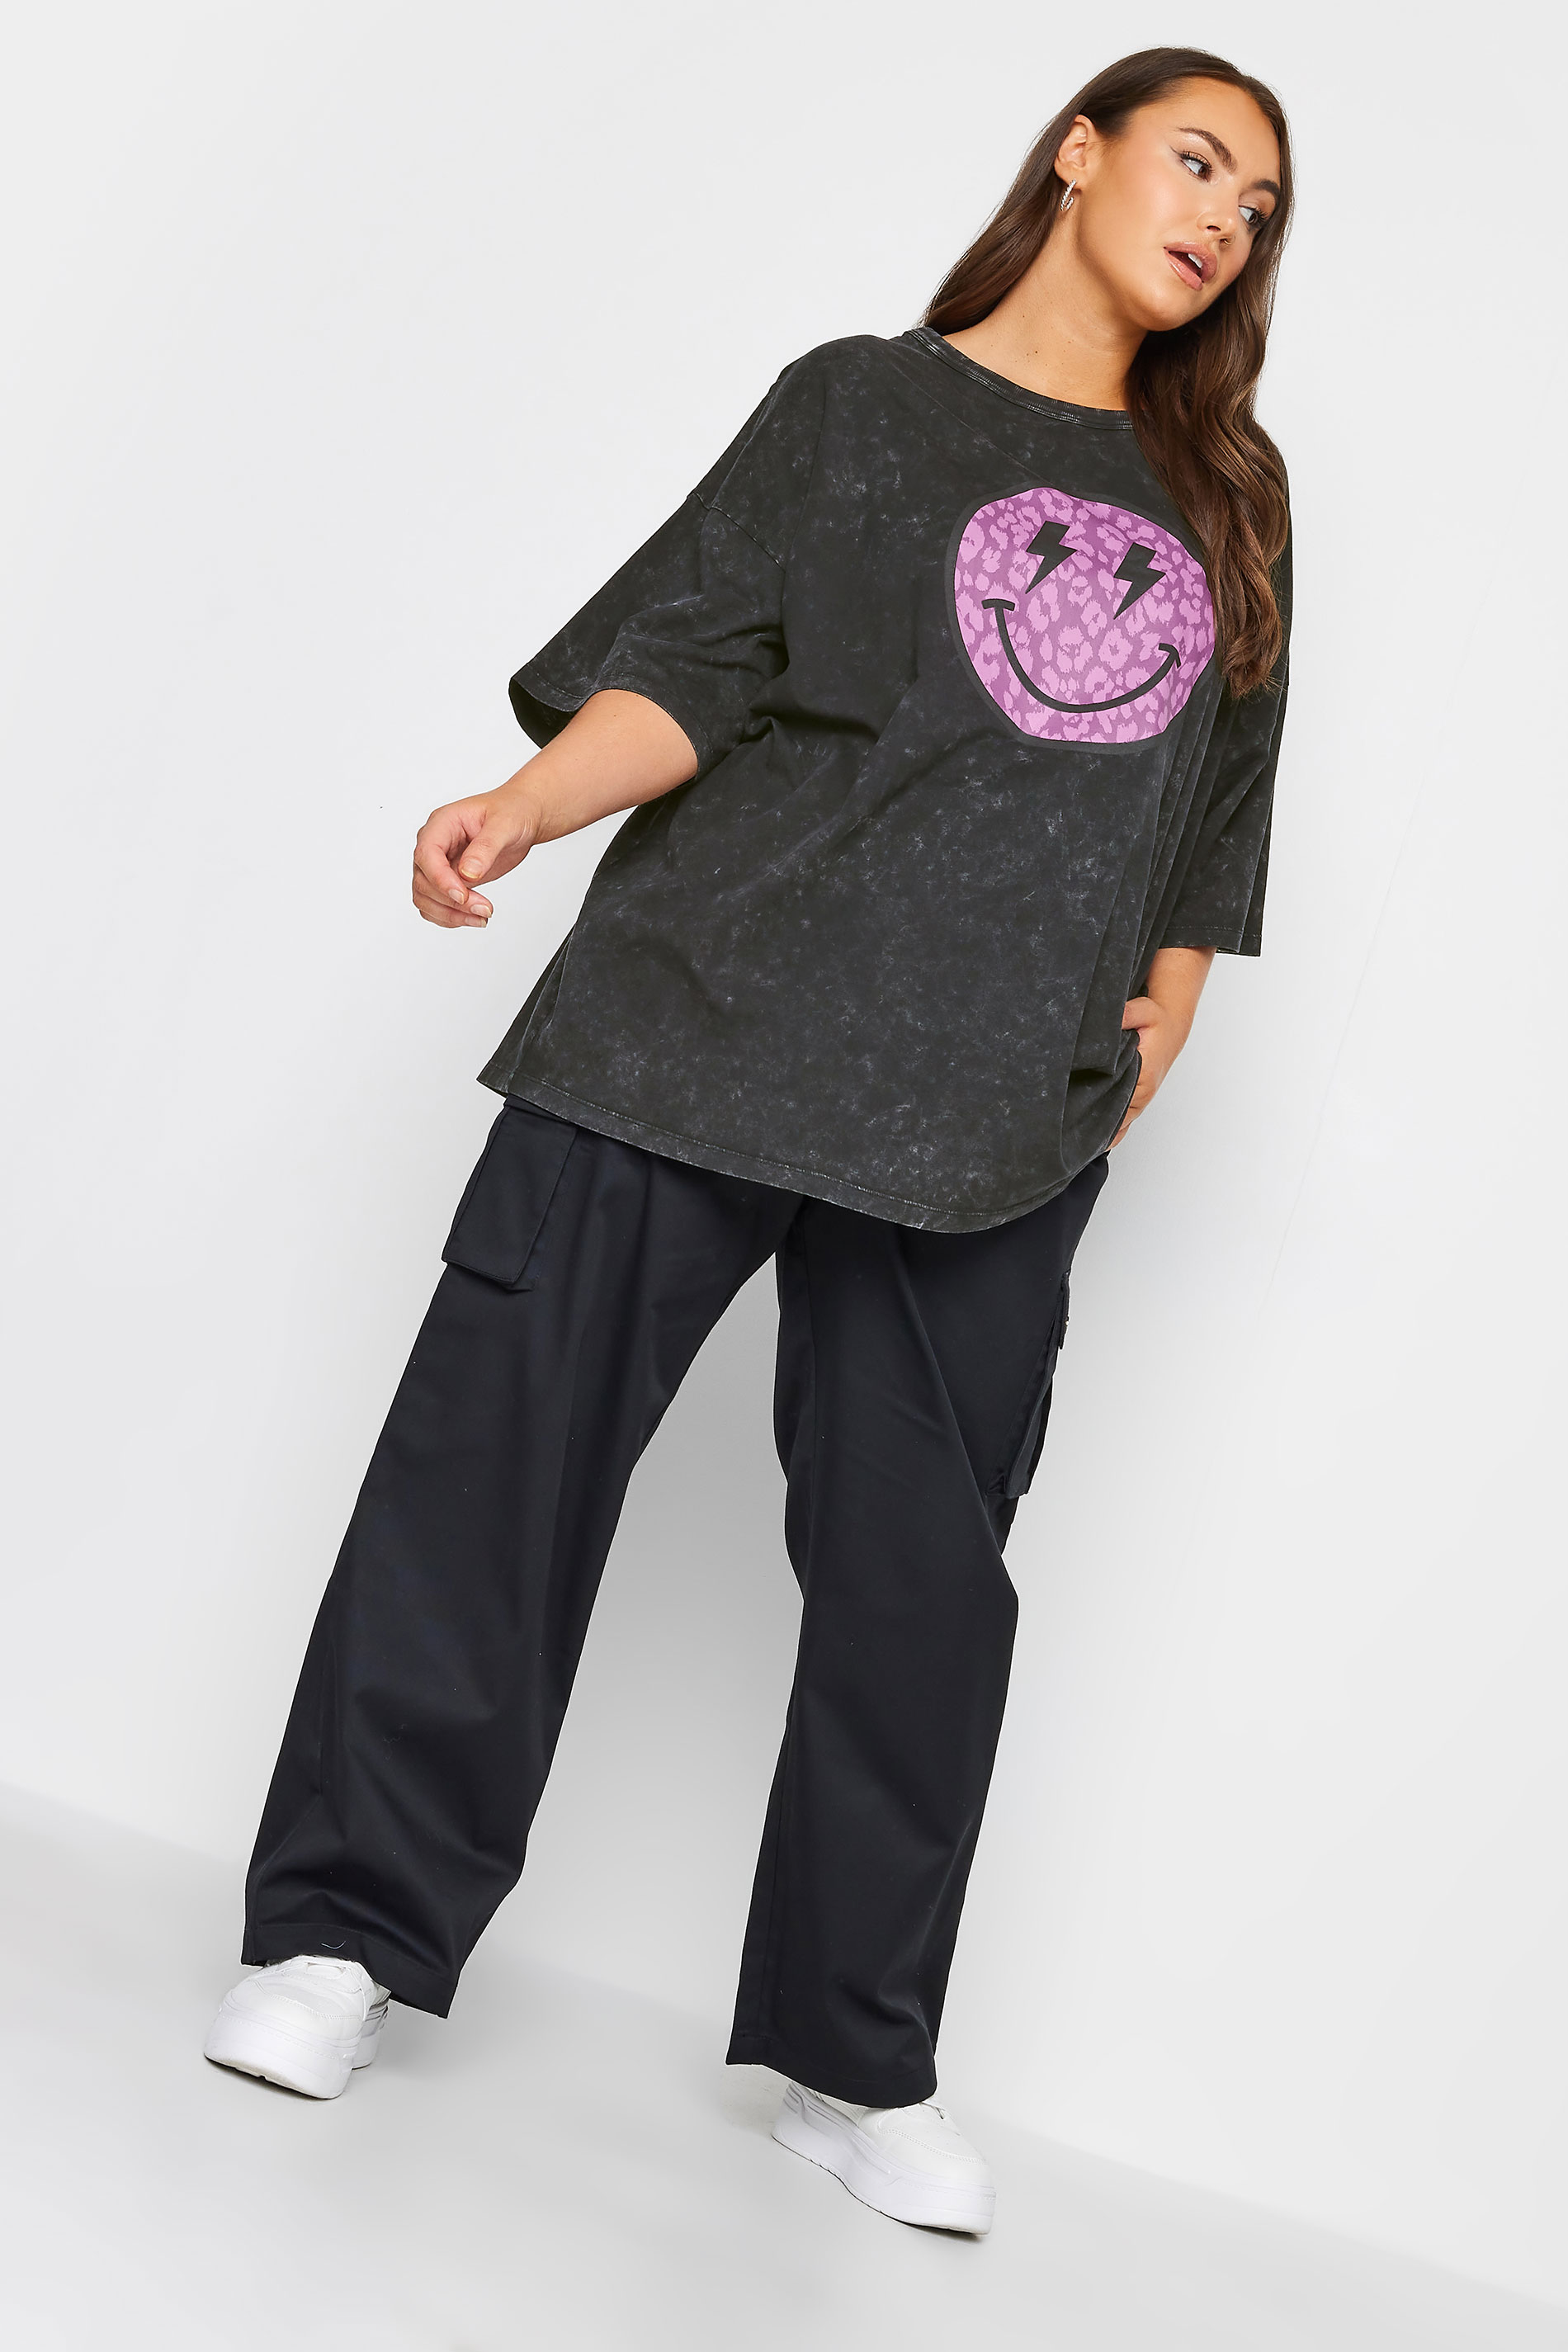 YOURS Curve Plus Size Charcoal Grey & Purple Leopard Print Smiley Face T-Shirt | Yours Clothing  2